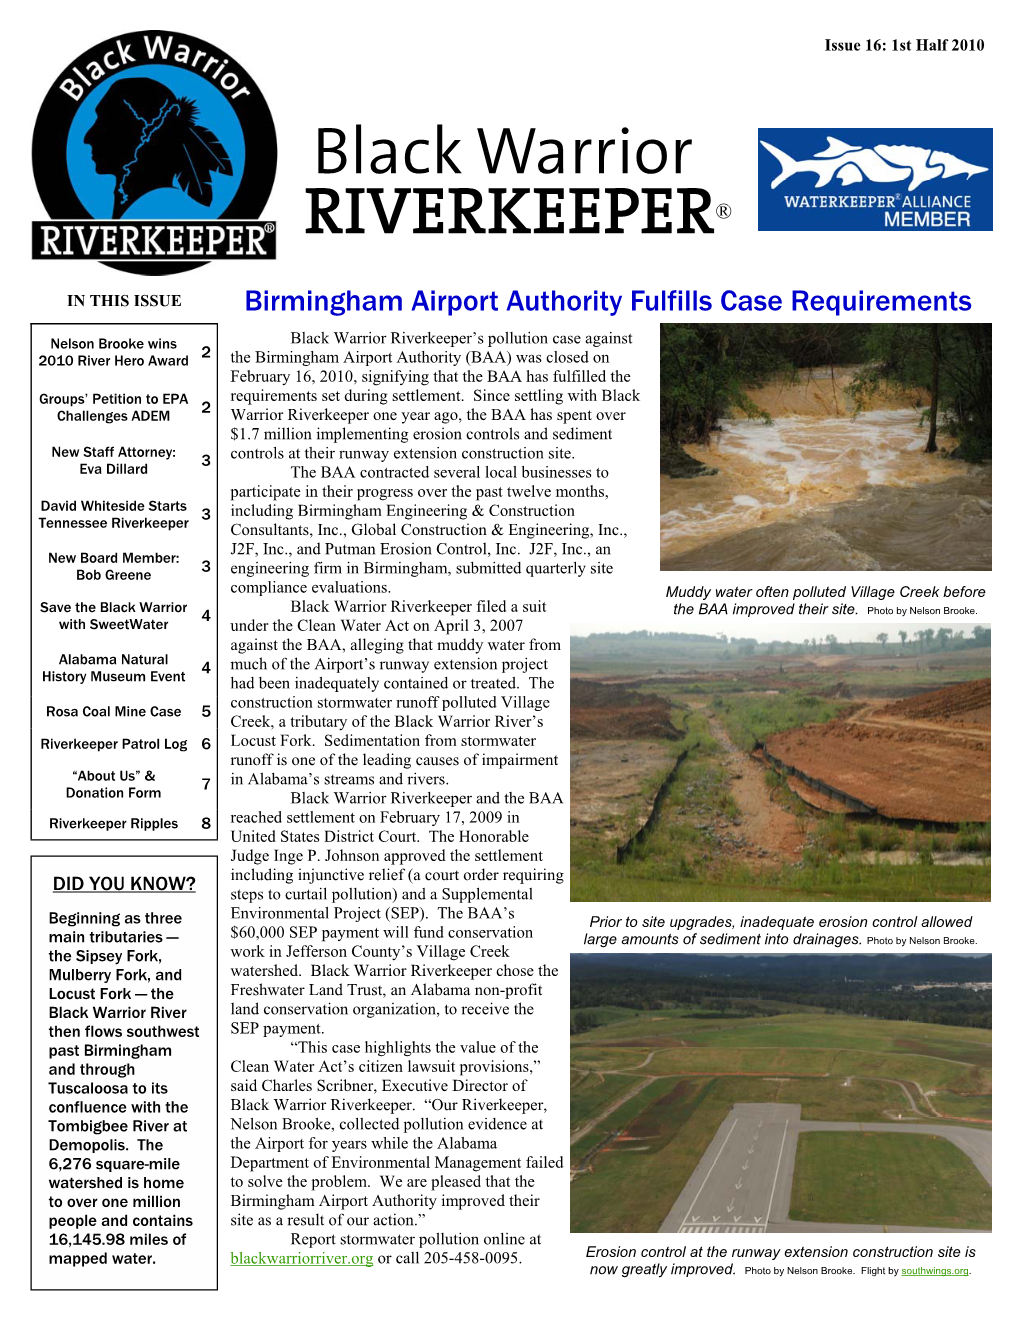 RIVERKEEPER® Black Warrior Riverkeeper’S Mission Is to Protect and Restore the Black Warrior River and Its Tributaries